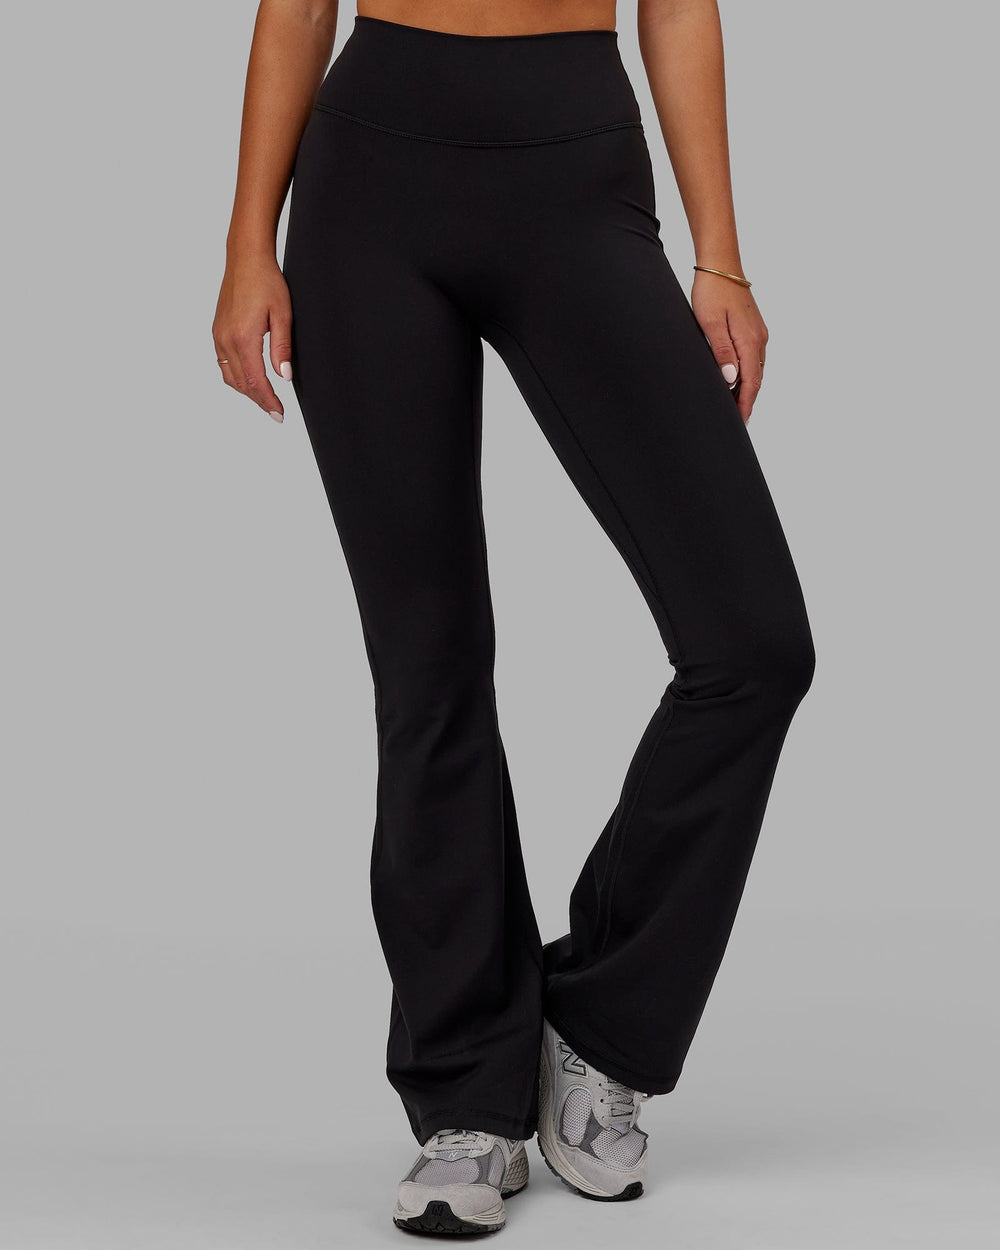 Everyday Flare X-Long Tight - Black